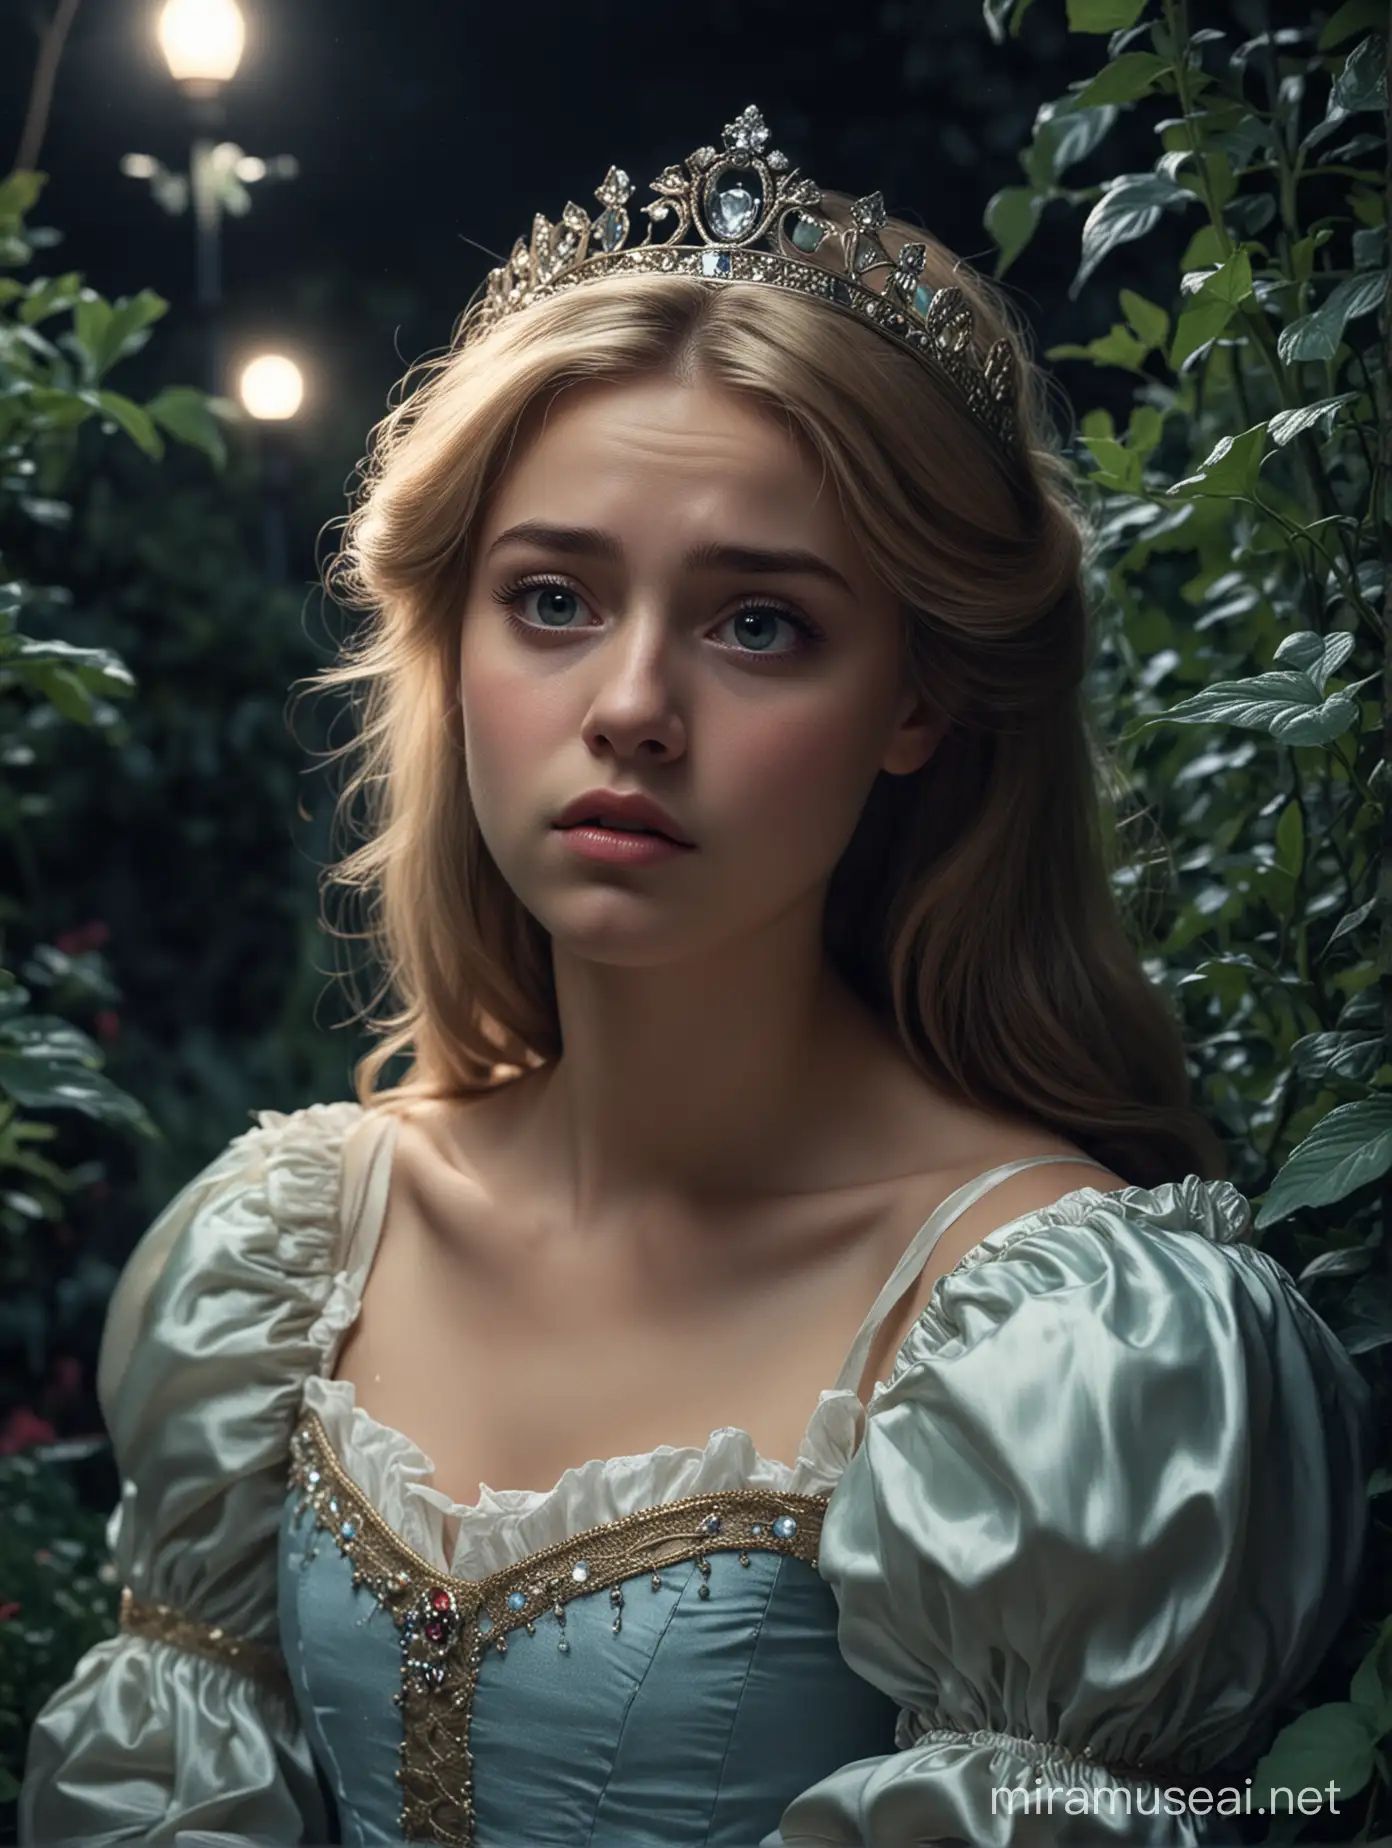 A weak beautiful princess laying in a garden at night, looking confused.